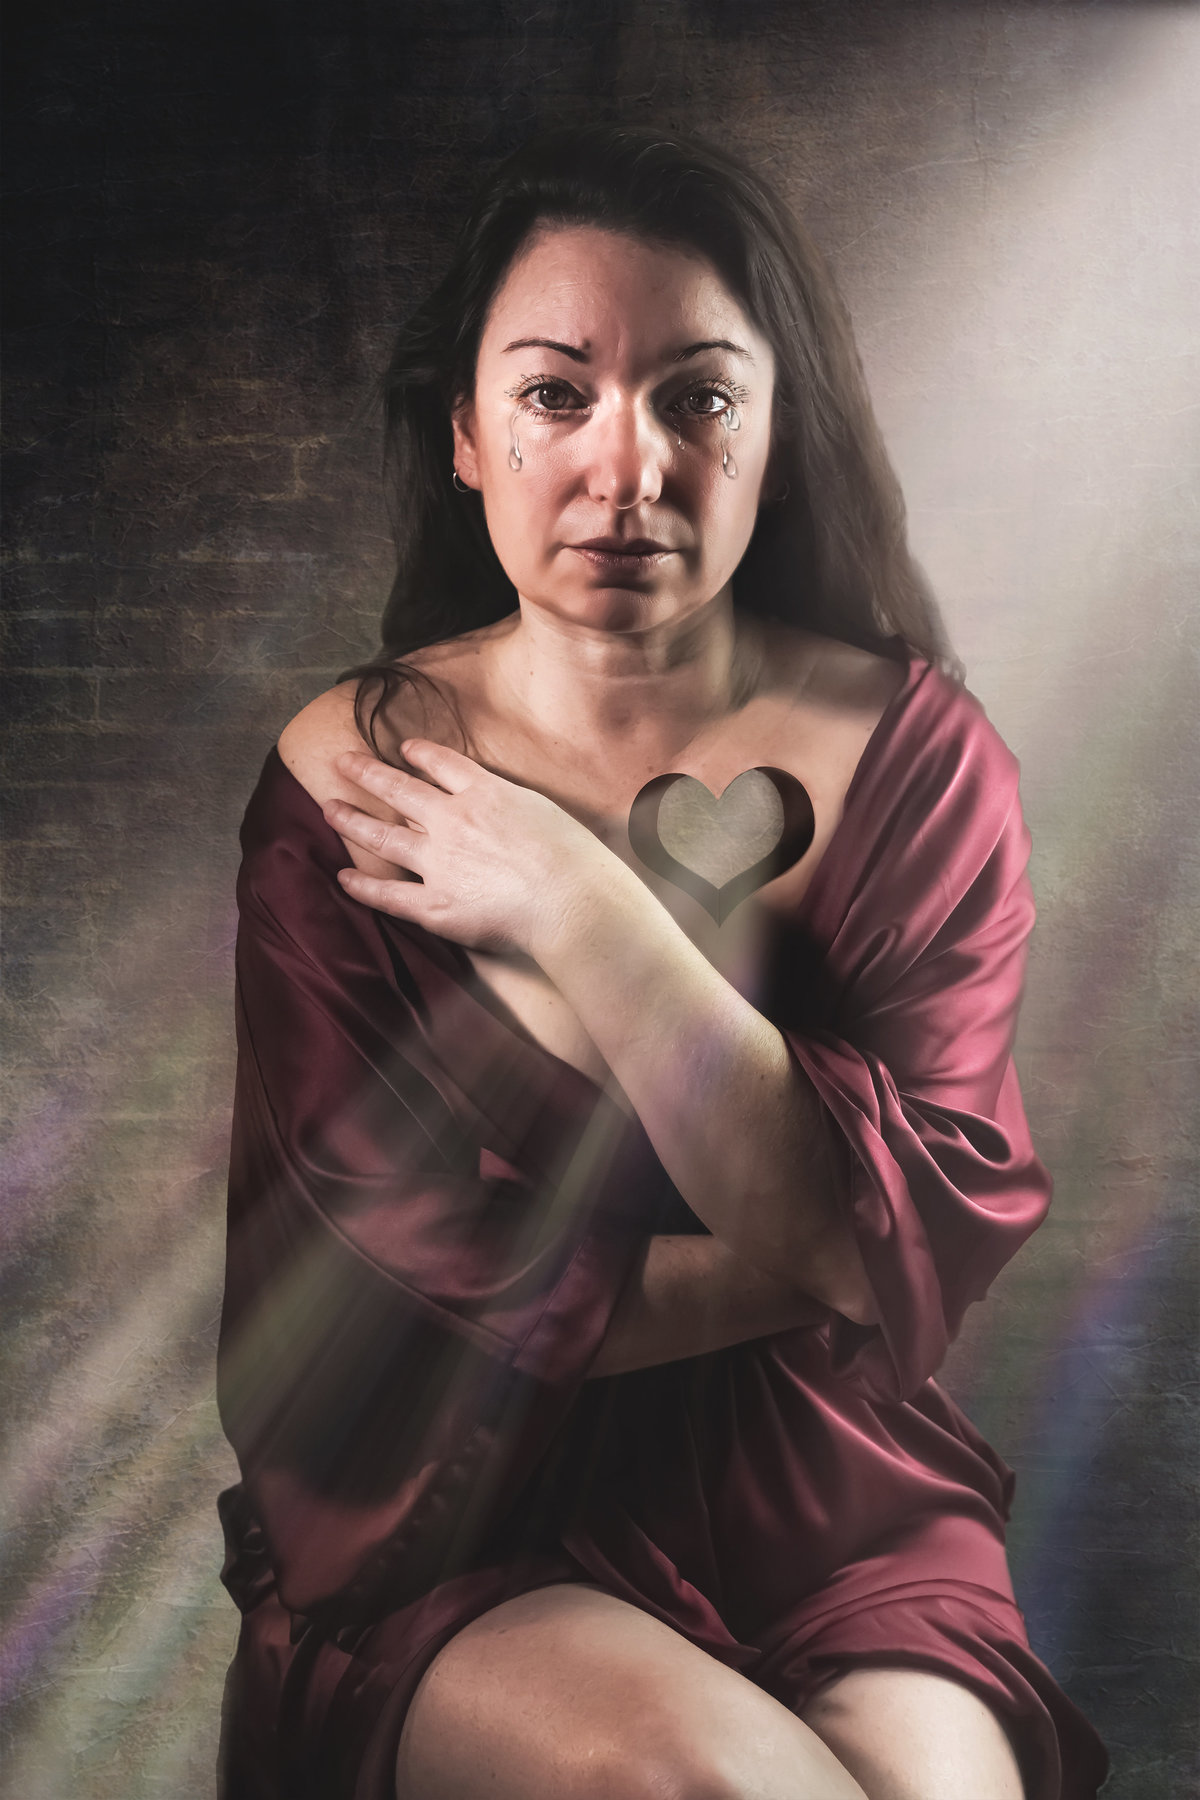 Creative portrait of a woman with a heart shaped hole in her chest.